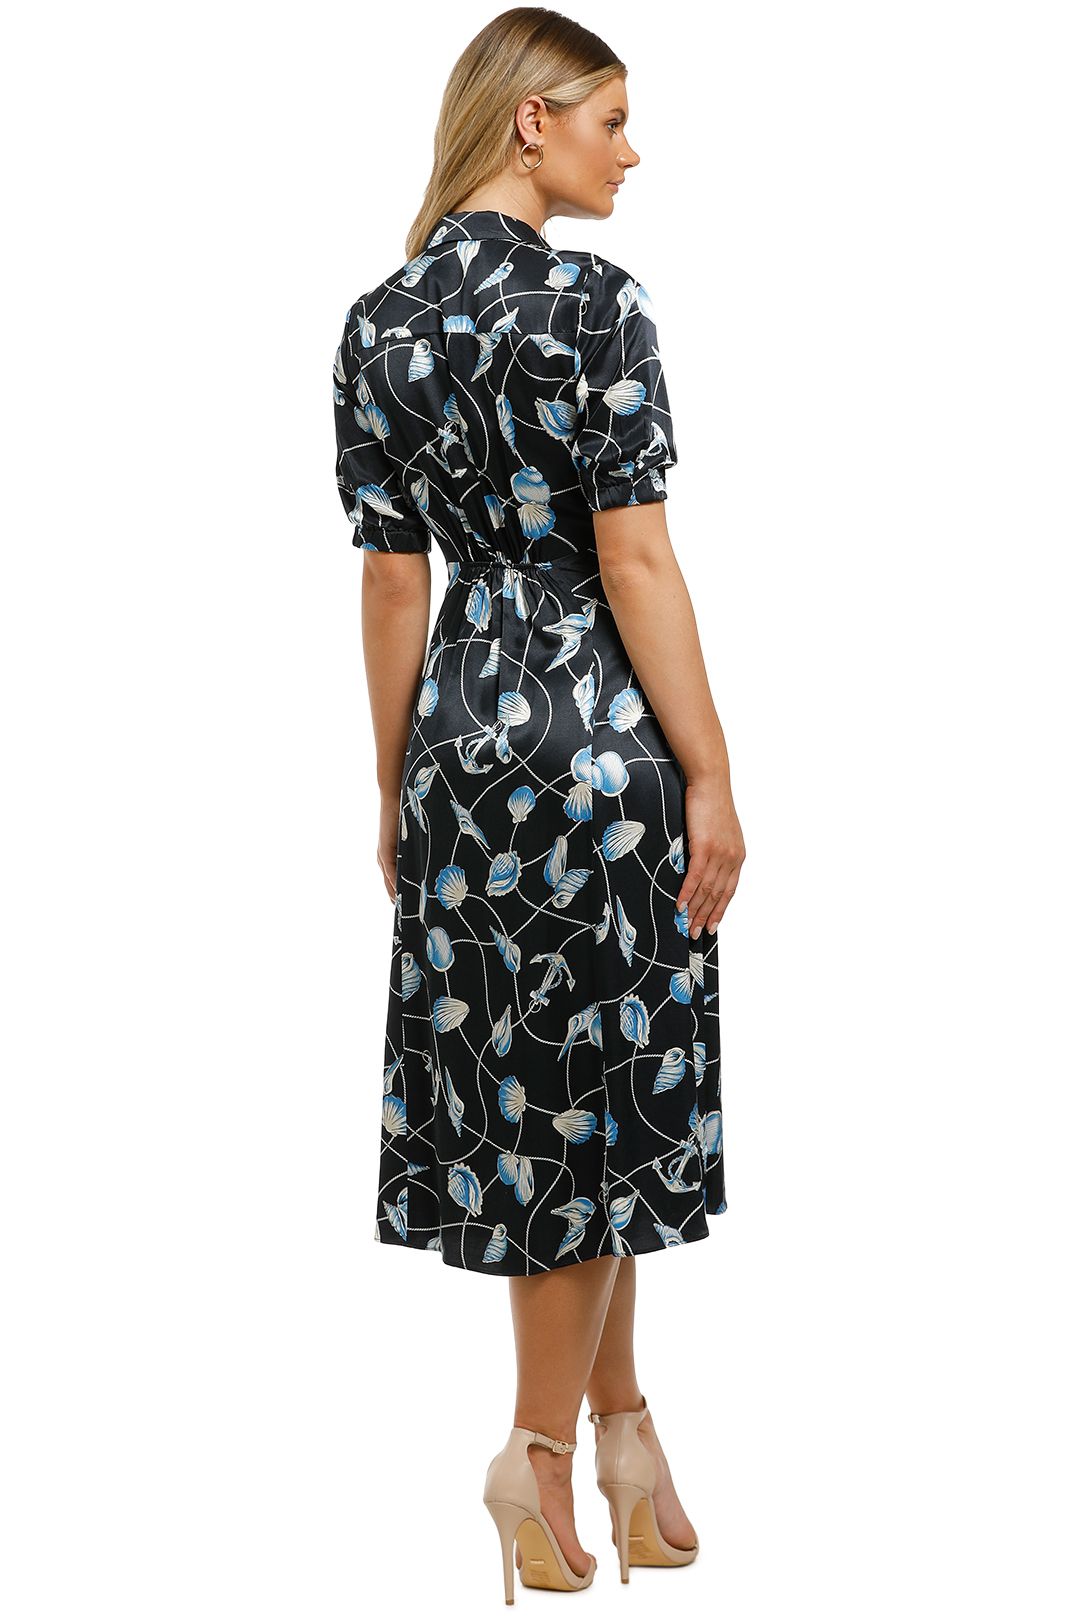 country road navy dress